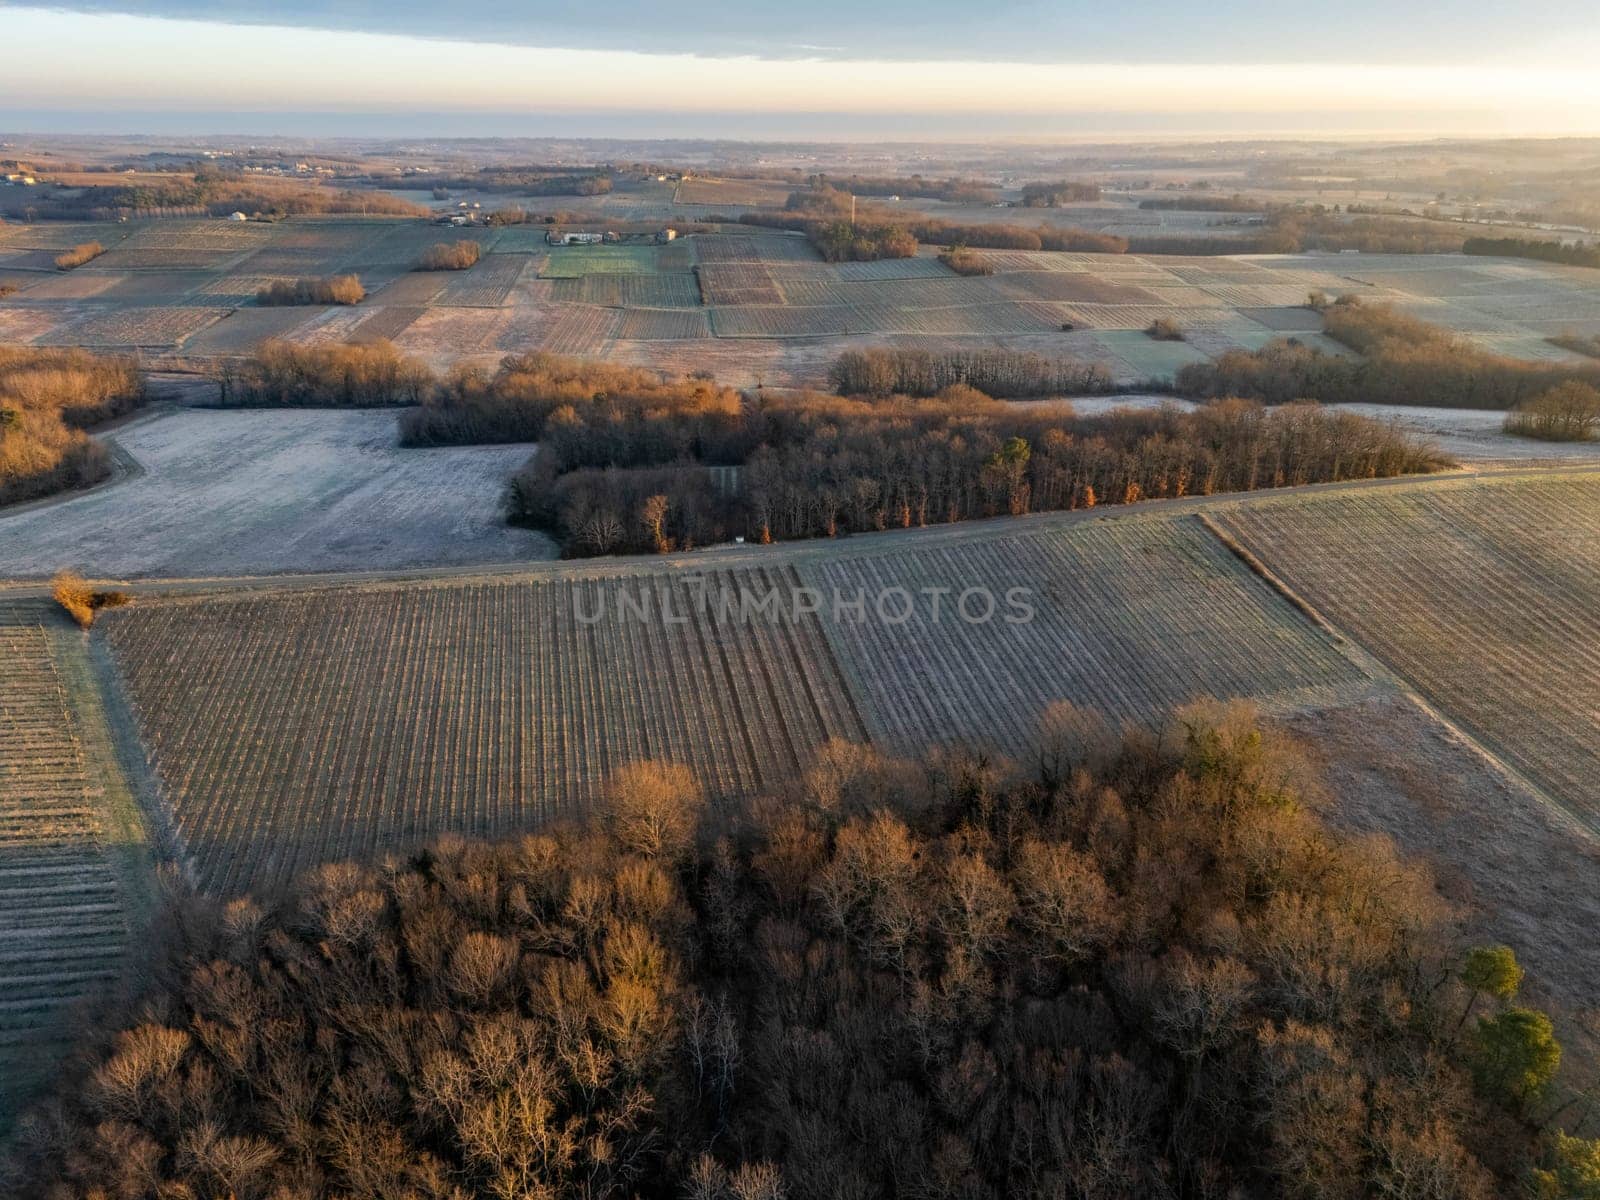 Aerial view of Bordeaux vineyard in winter at sunrise, Rions, Gironde, France by FreeProd